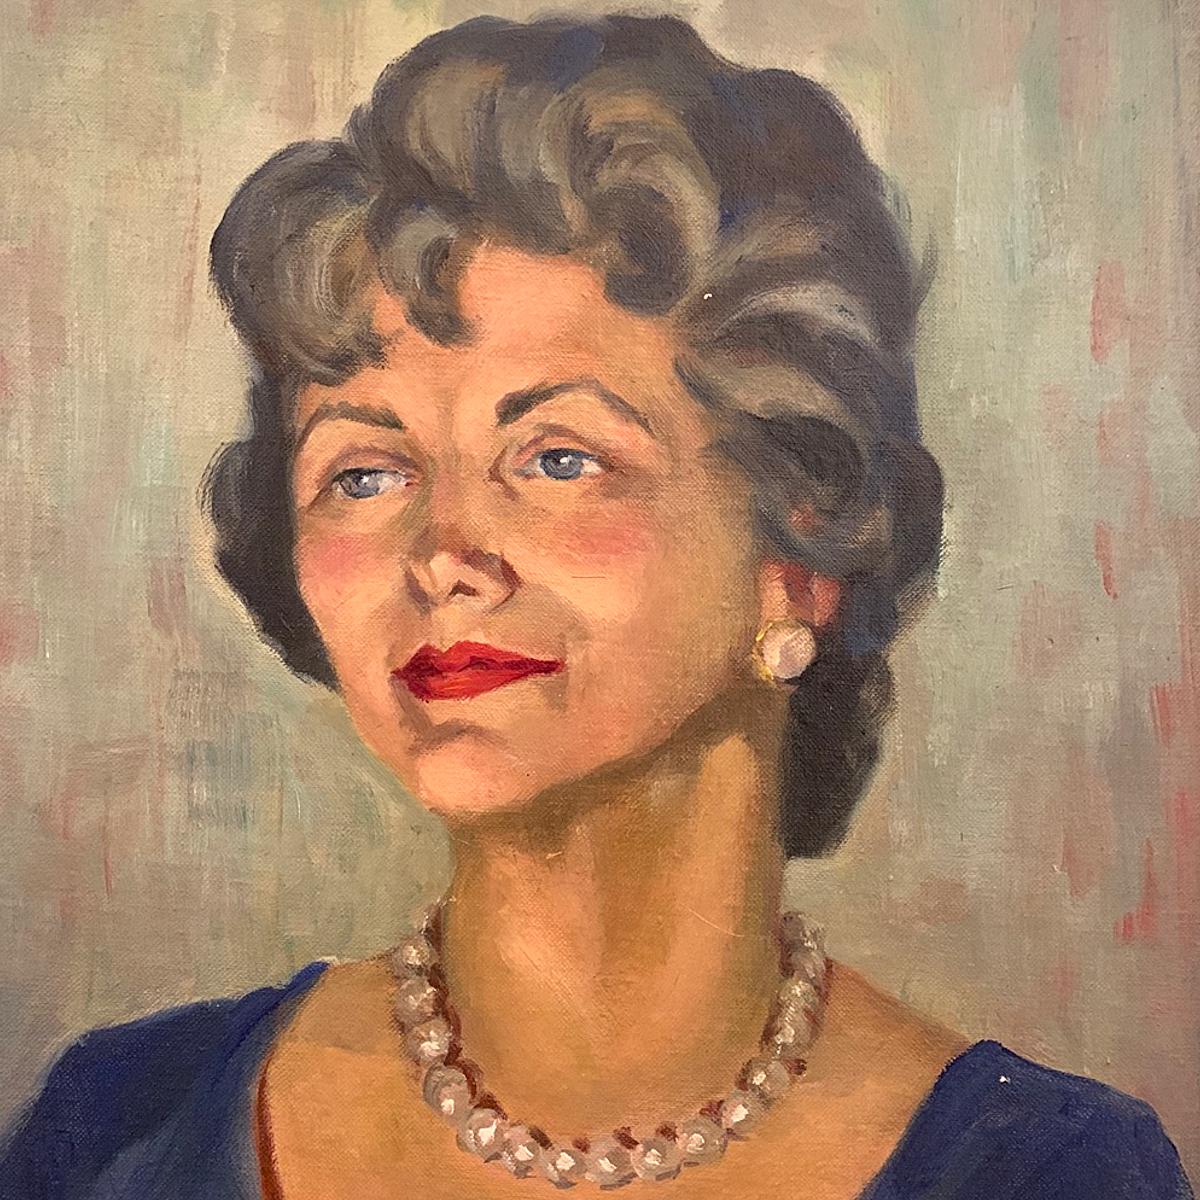 American Classical 1950s Portrait Painting, Woman with Pearls, Alberta Winchester by Alida Vreeland